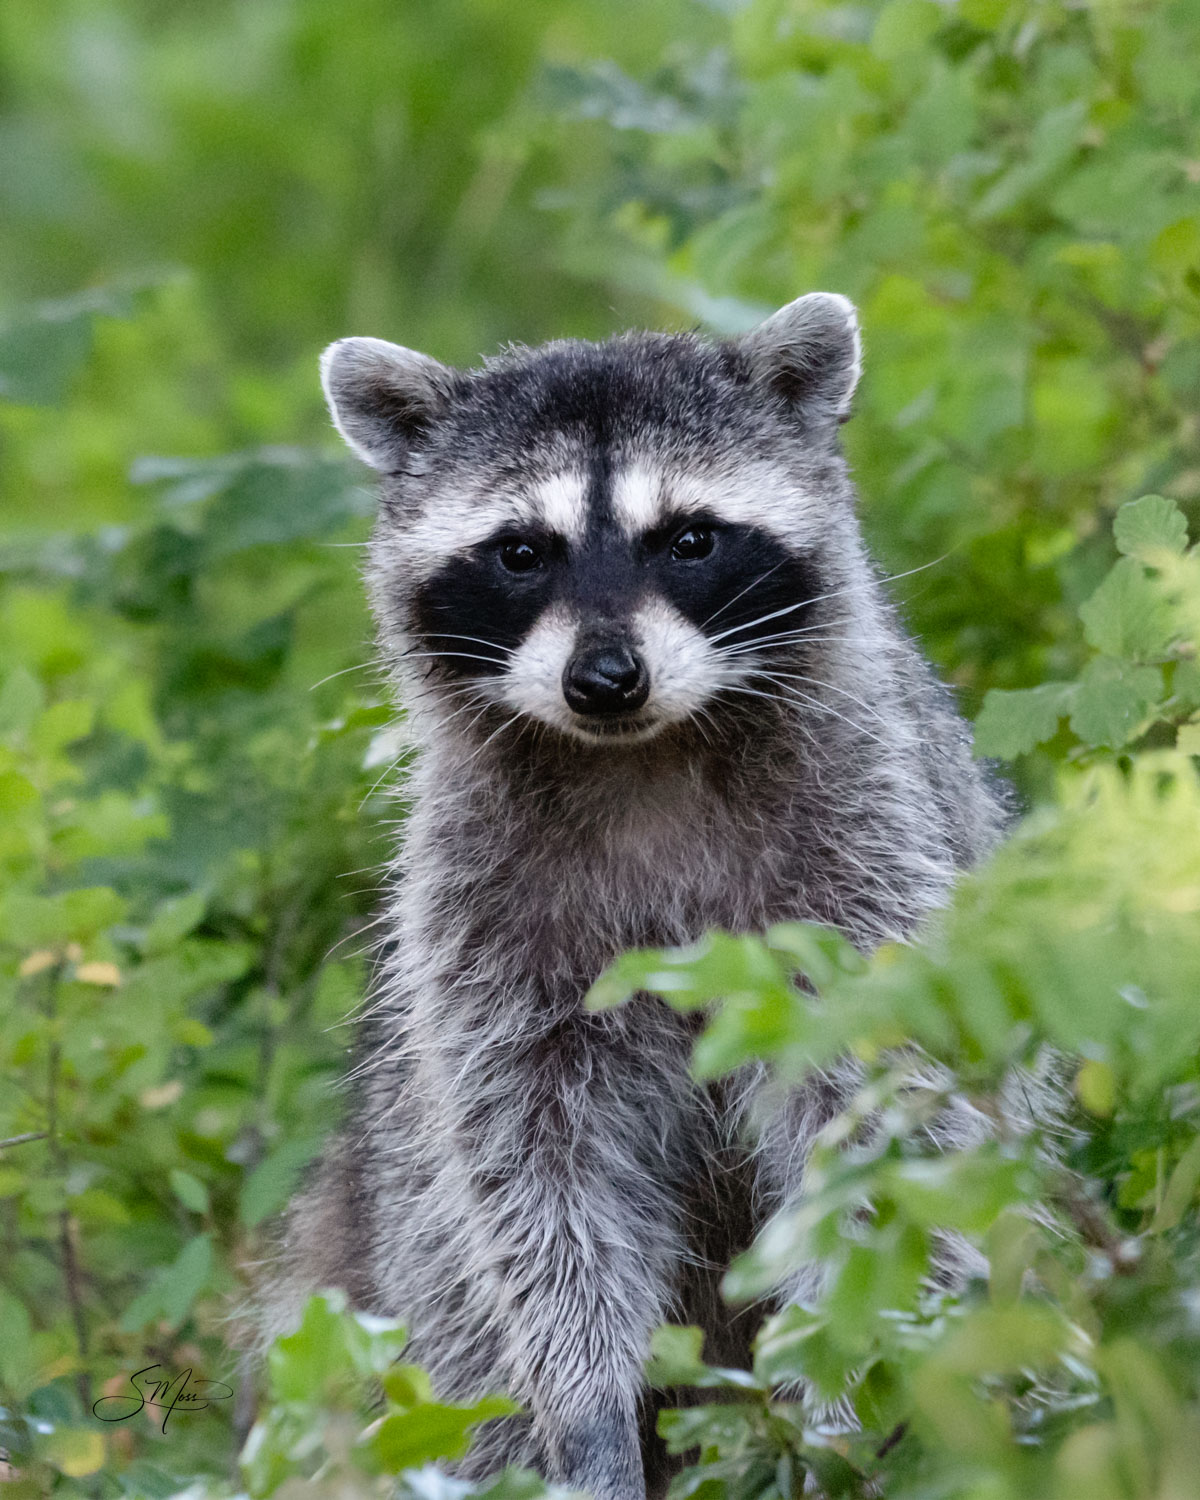 raccoon, baby raccoon, animal, nature vertical, no people, Suncadia, close-up, looking at camera, green grass, woodland, forest...